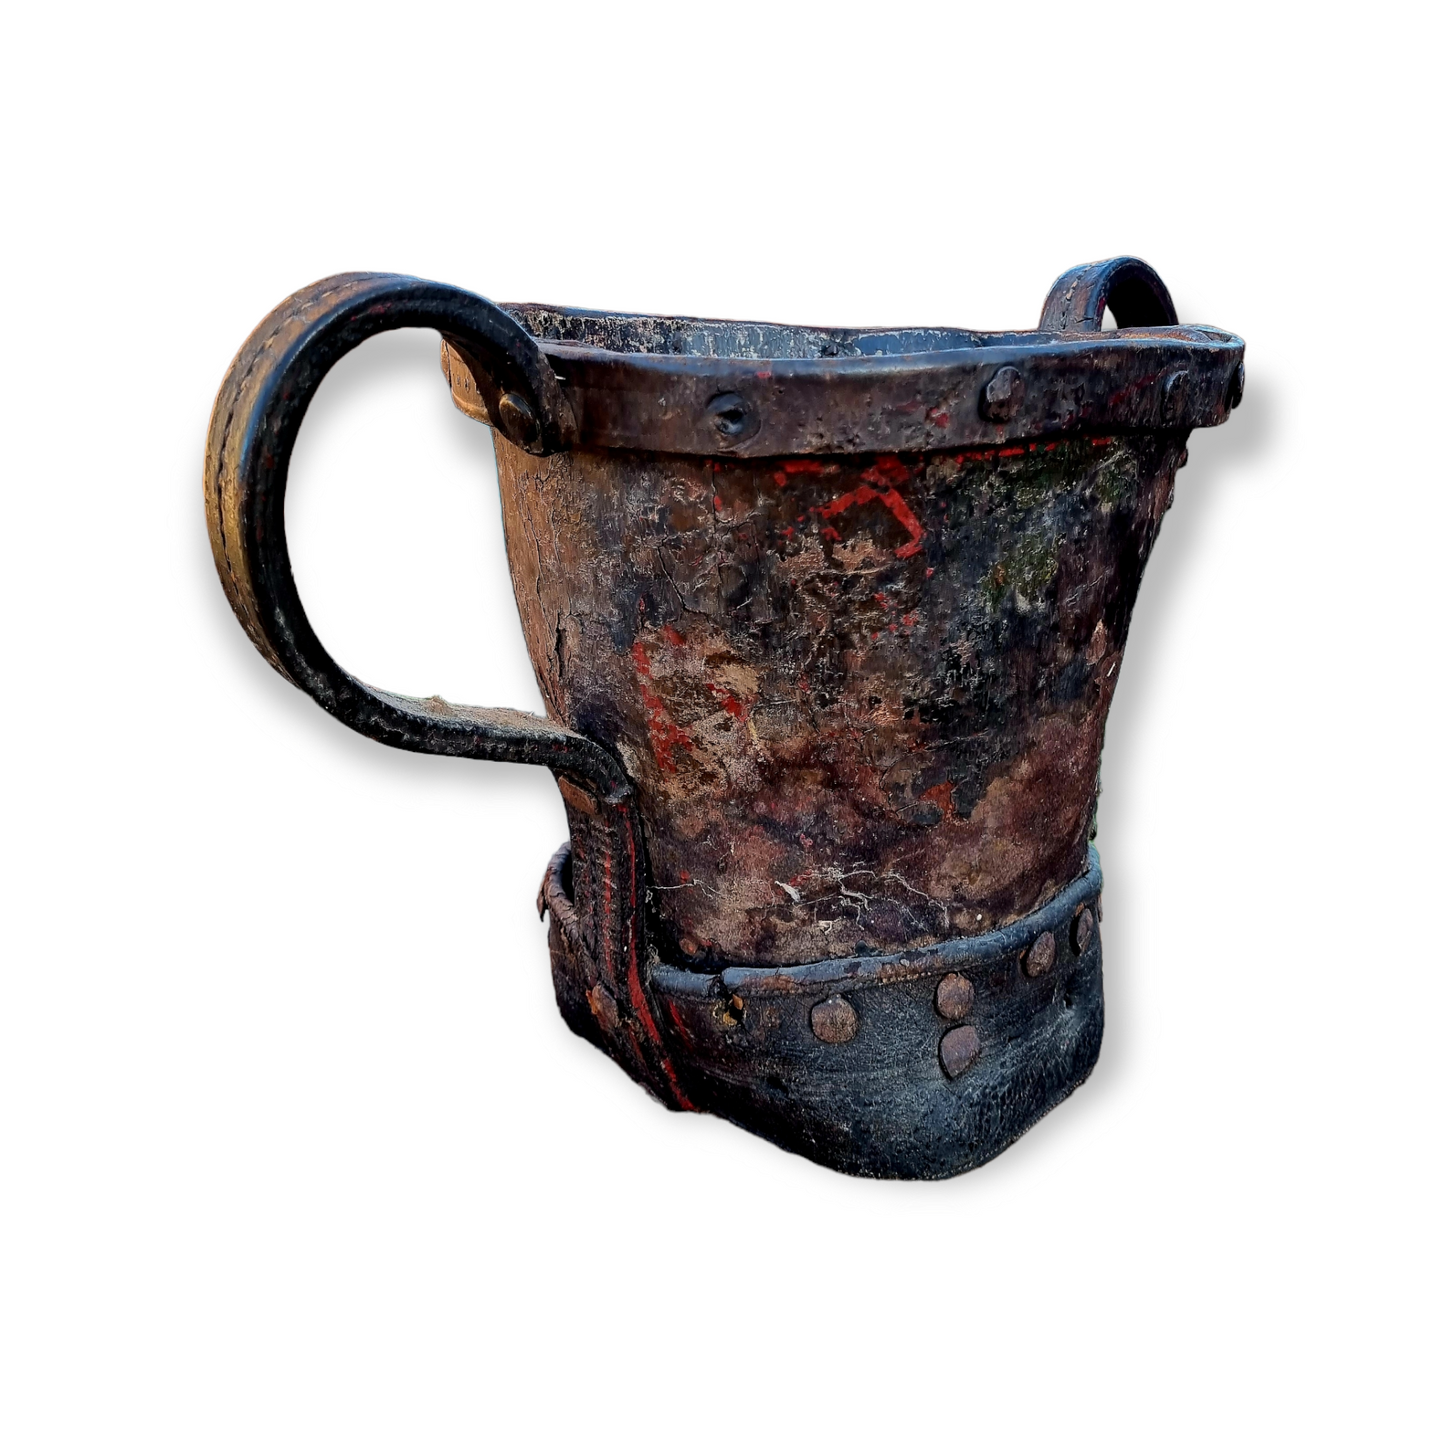 18th Century English Antique Leather Fire Bucket In The Form Of A Loving Cup